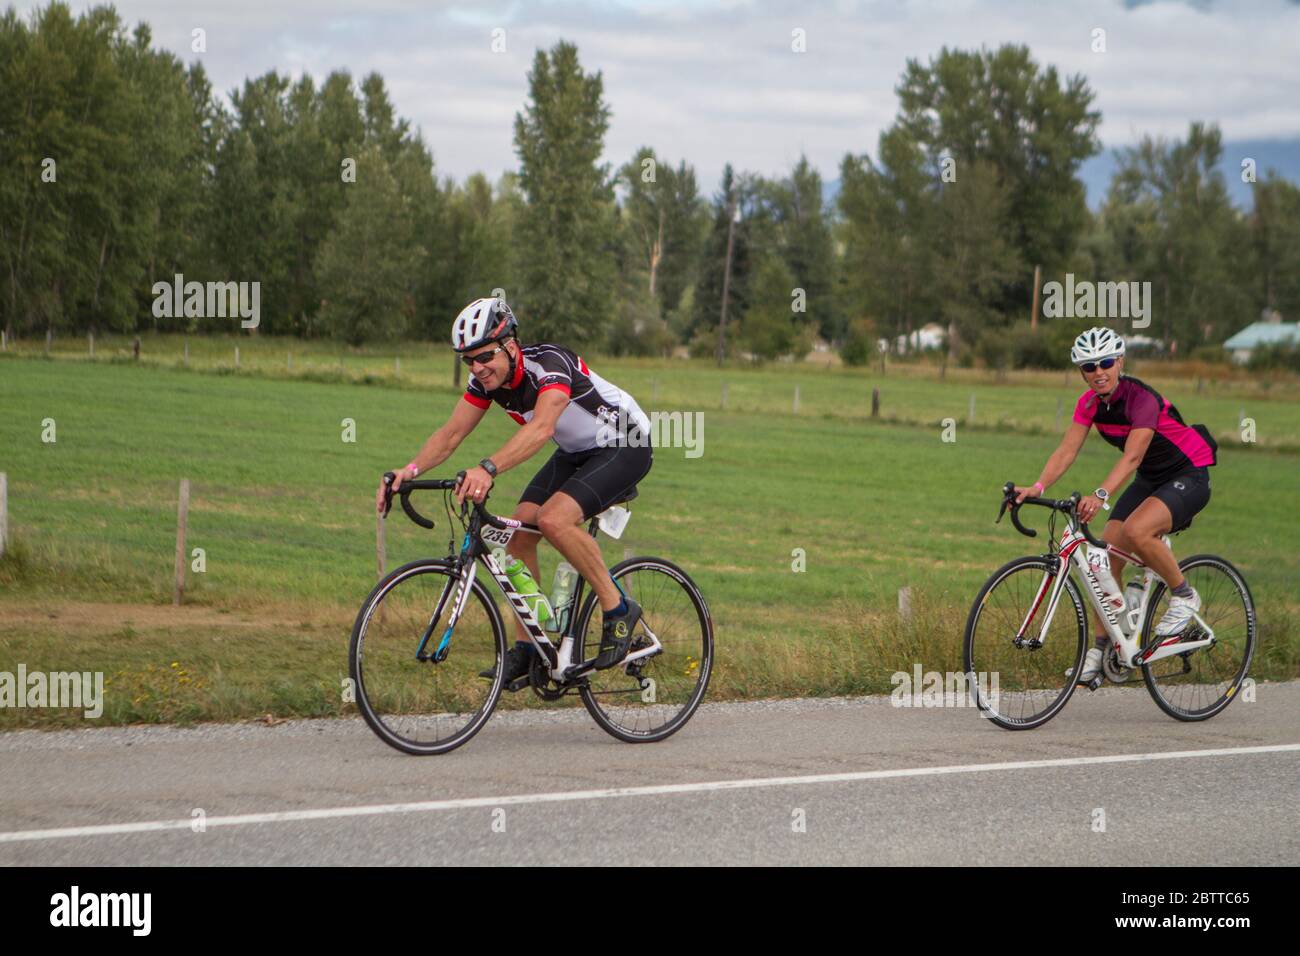 Scenic Bike Race, 2 riders, in full racing gear and uniform. Race goes thru farmland and the mountains. Stock Photo